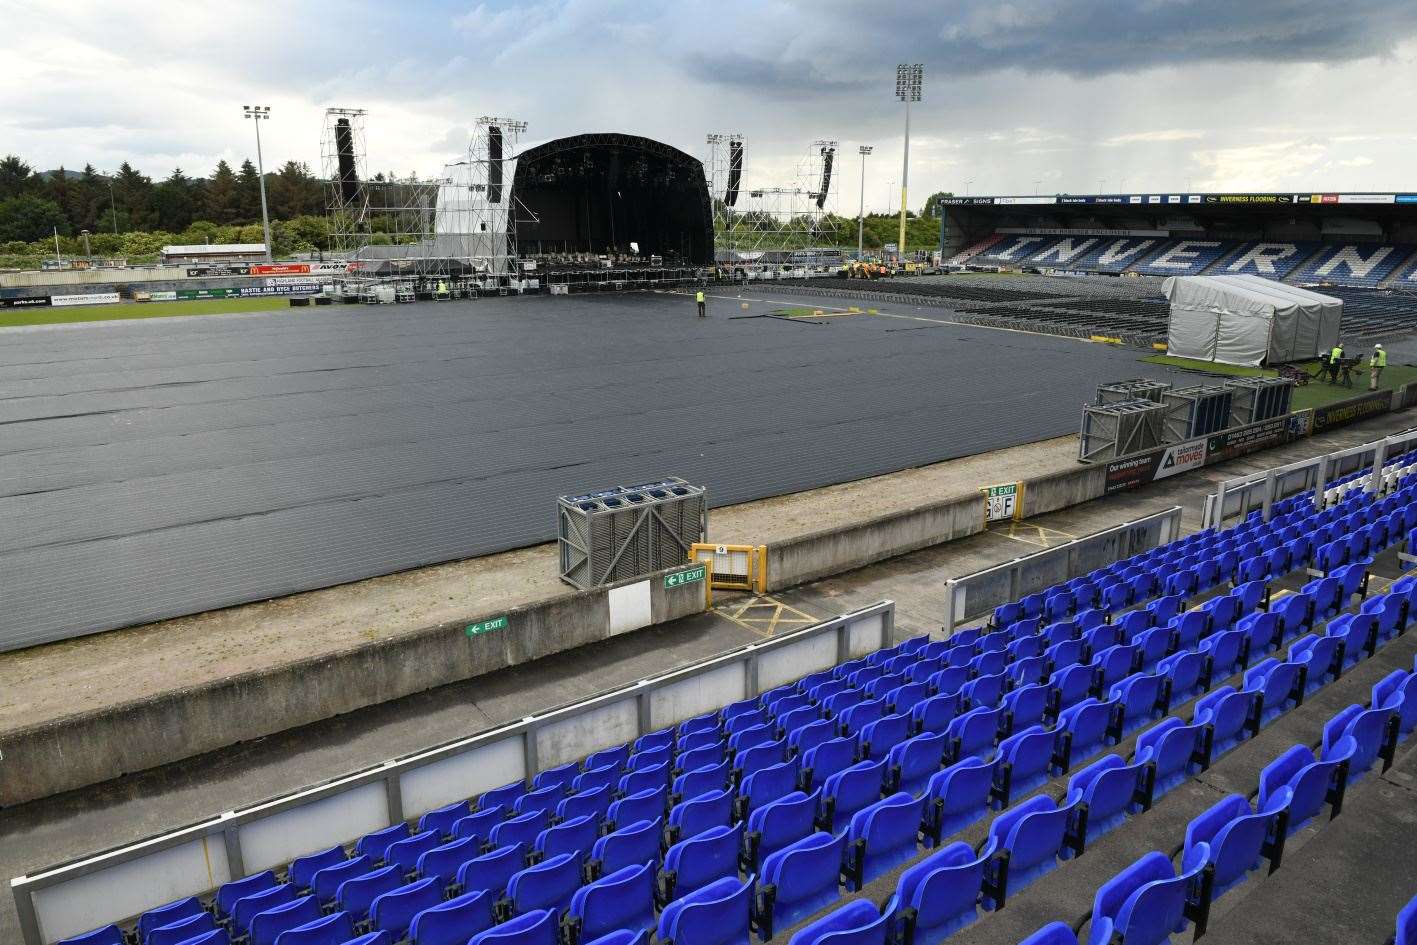 The stage is being set at Caledonian Stadium.